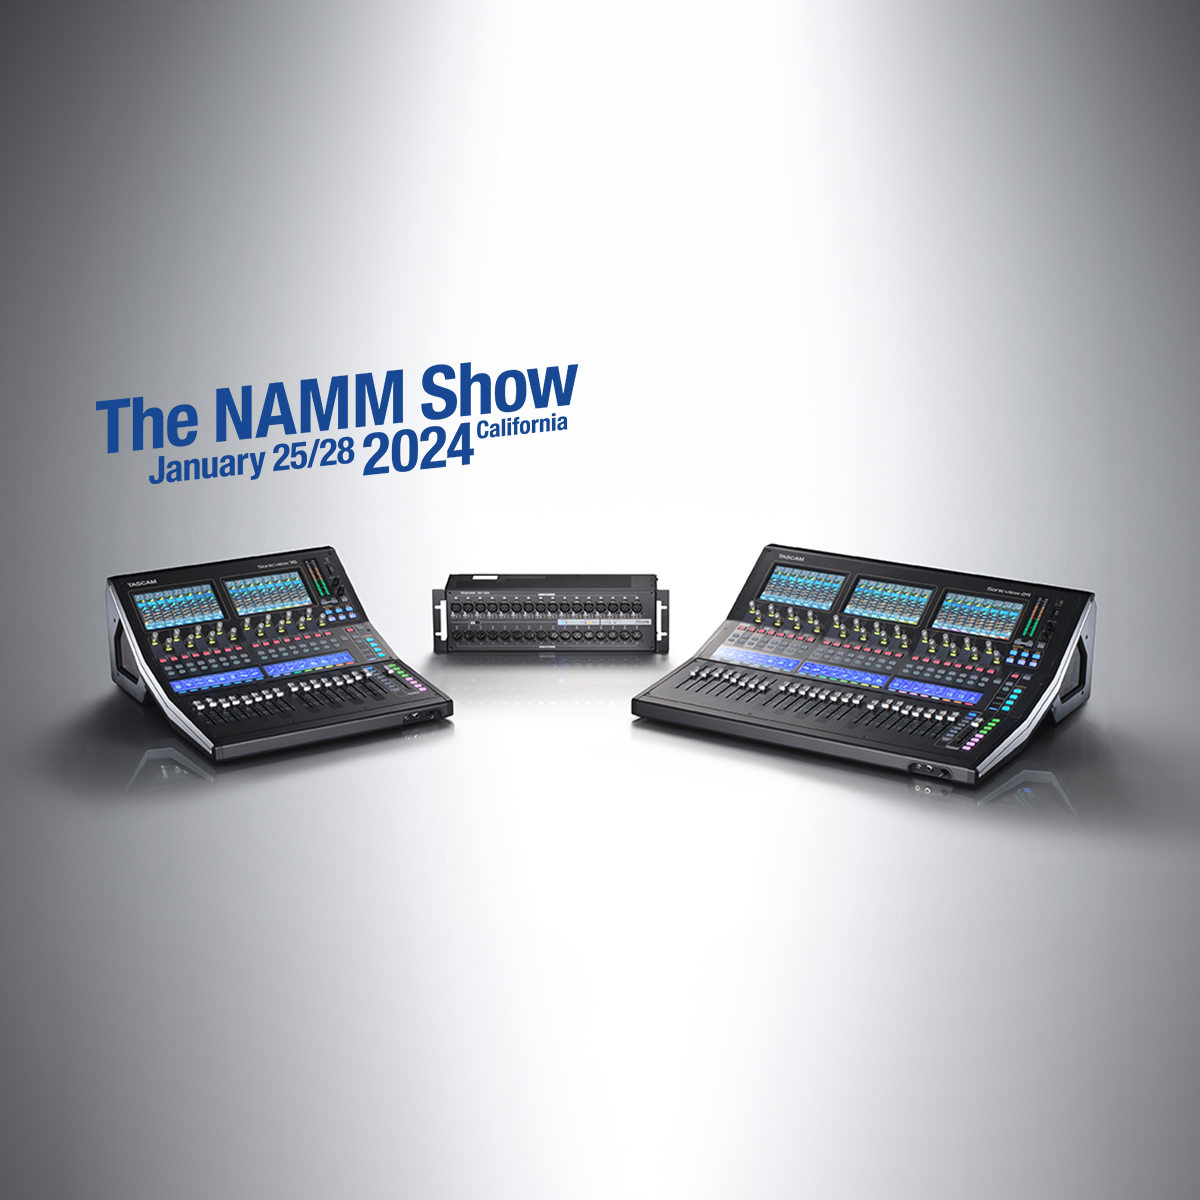 TASCAM To Showcase the Sonicview Digital Recording and Mixing Consoles During NAMM